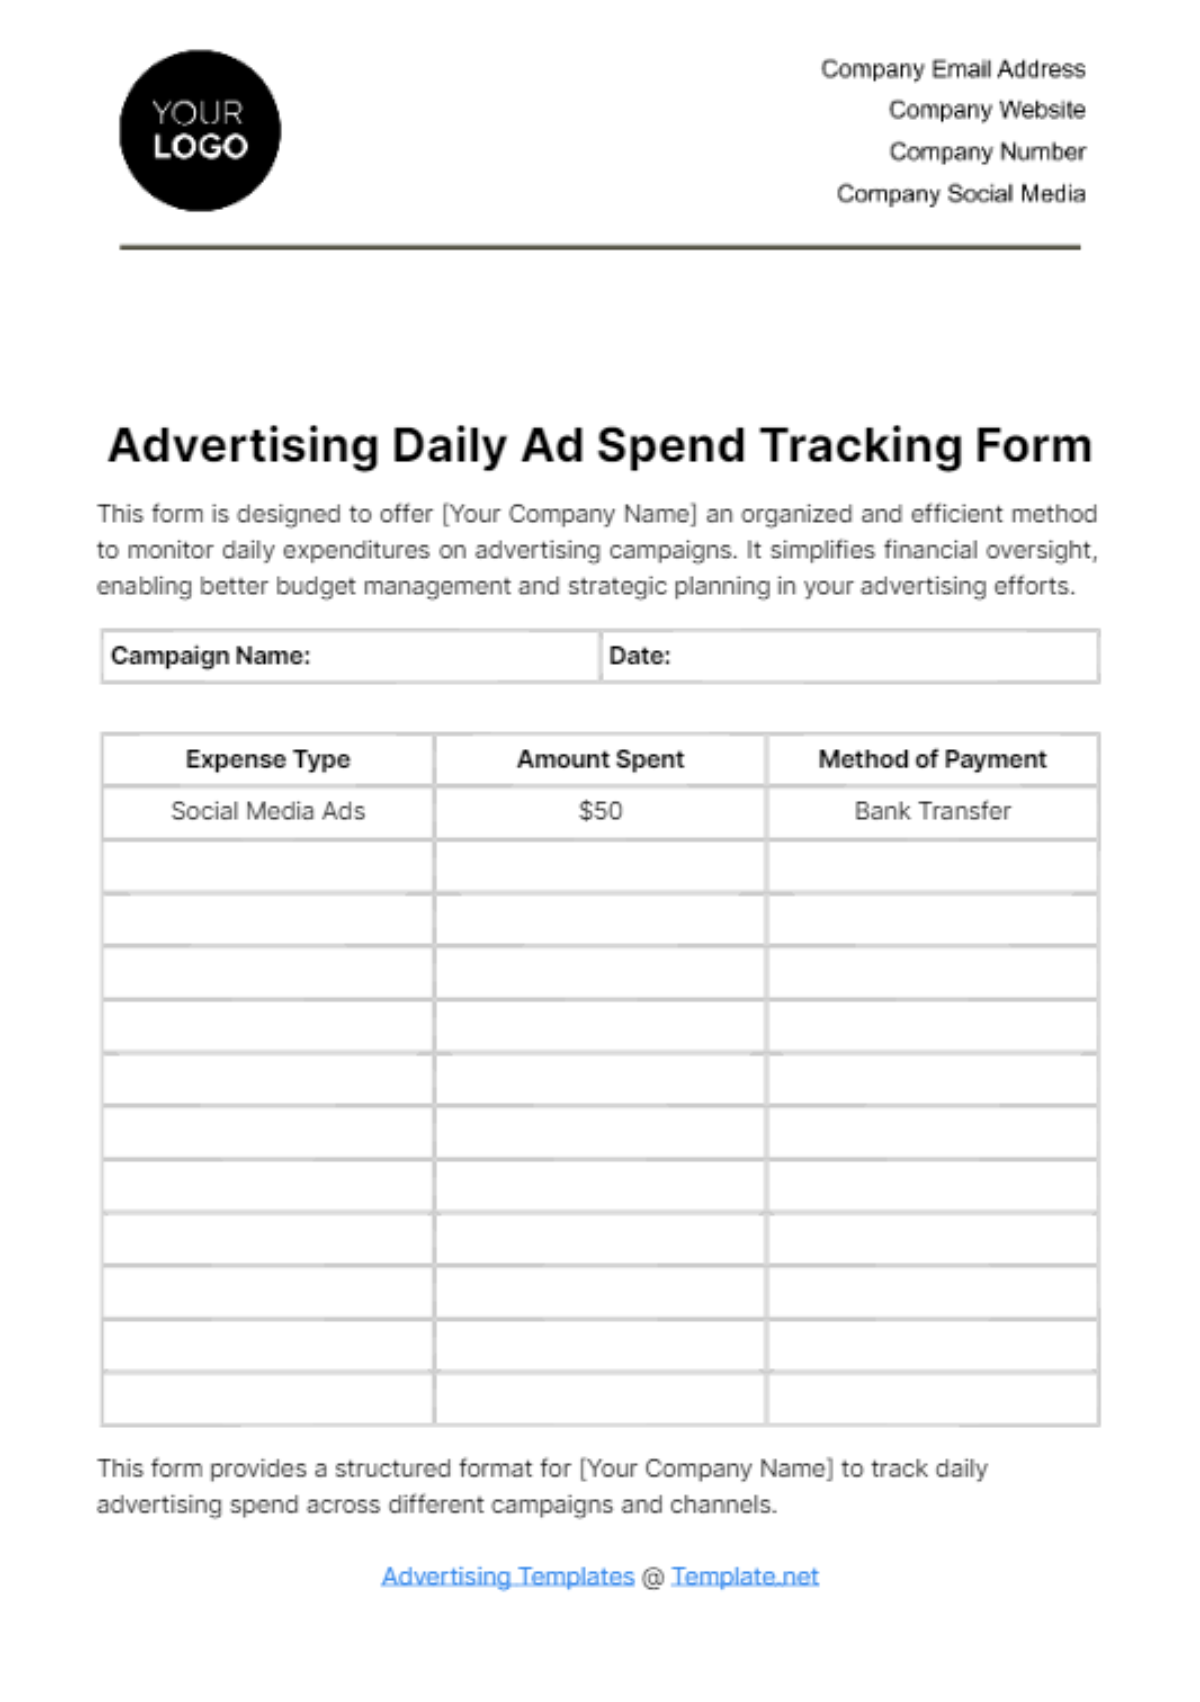 Free Advertising Daily Ad Spend Tracking Form Template